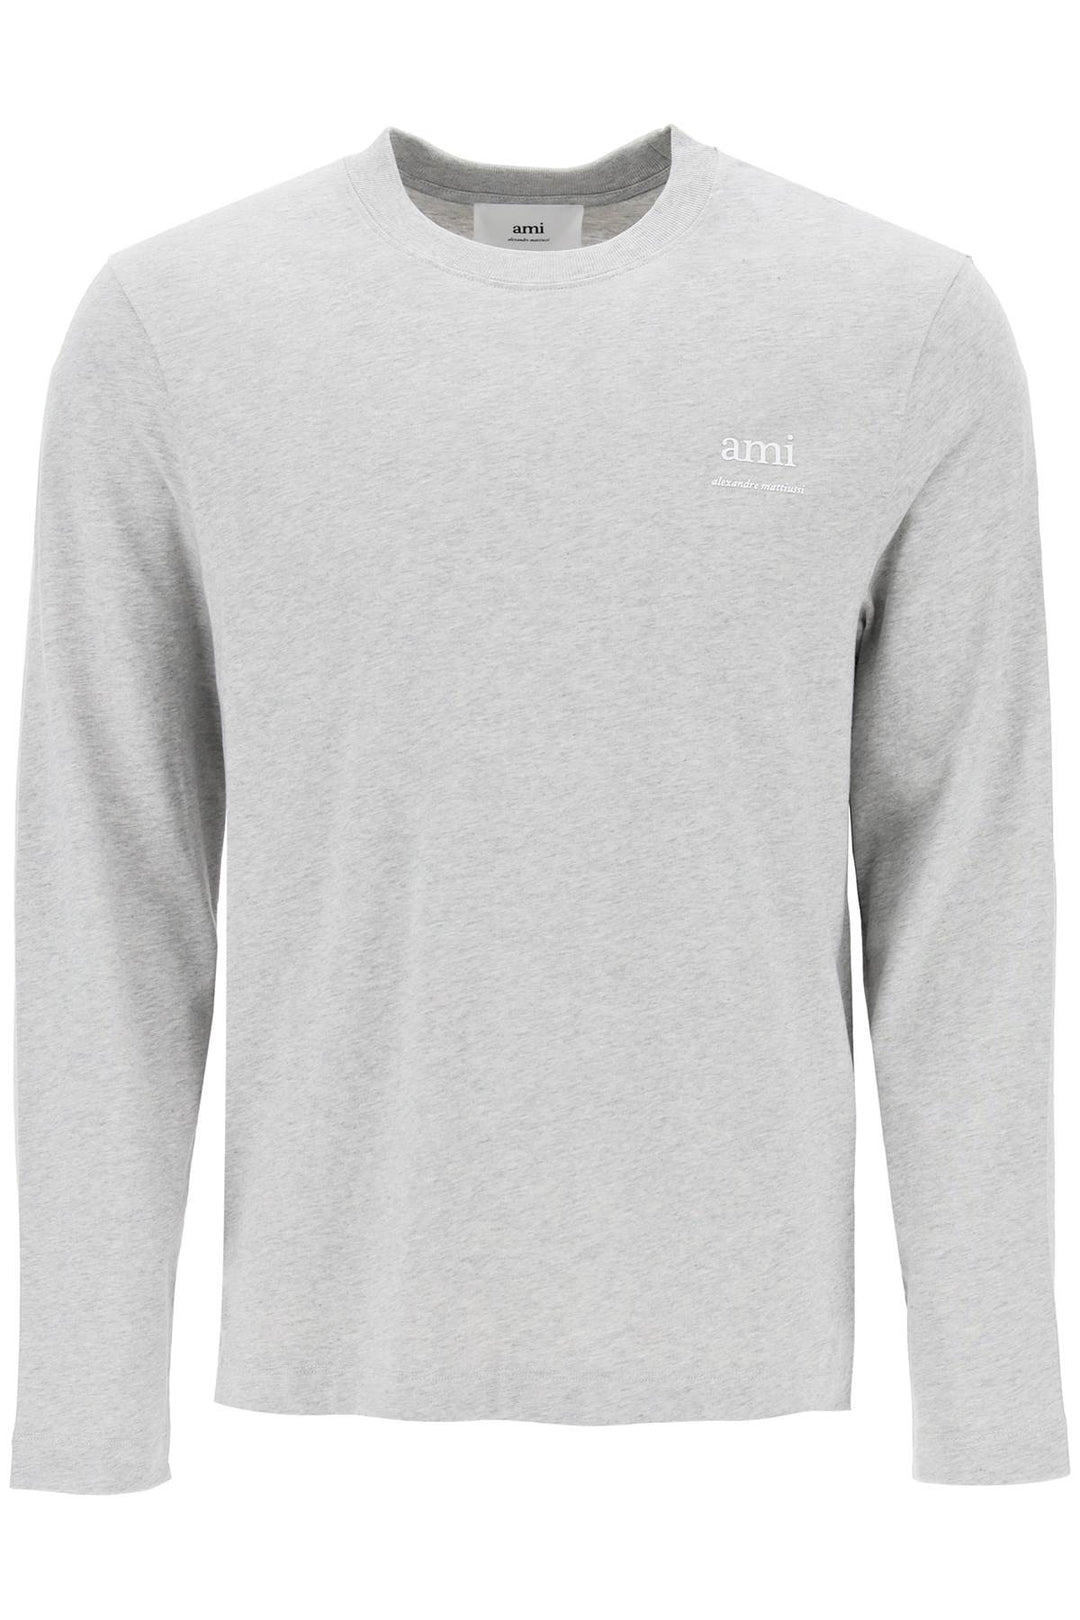 Ami paris long-sleeved cotton t-shirt for-0